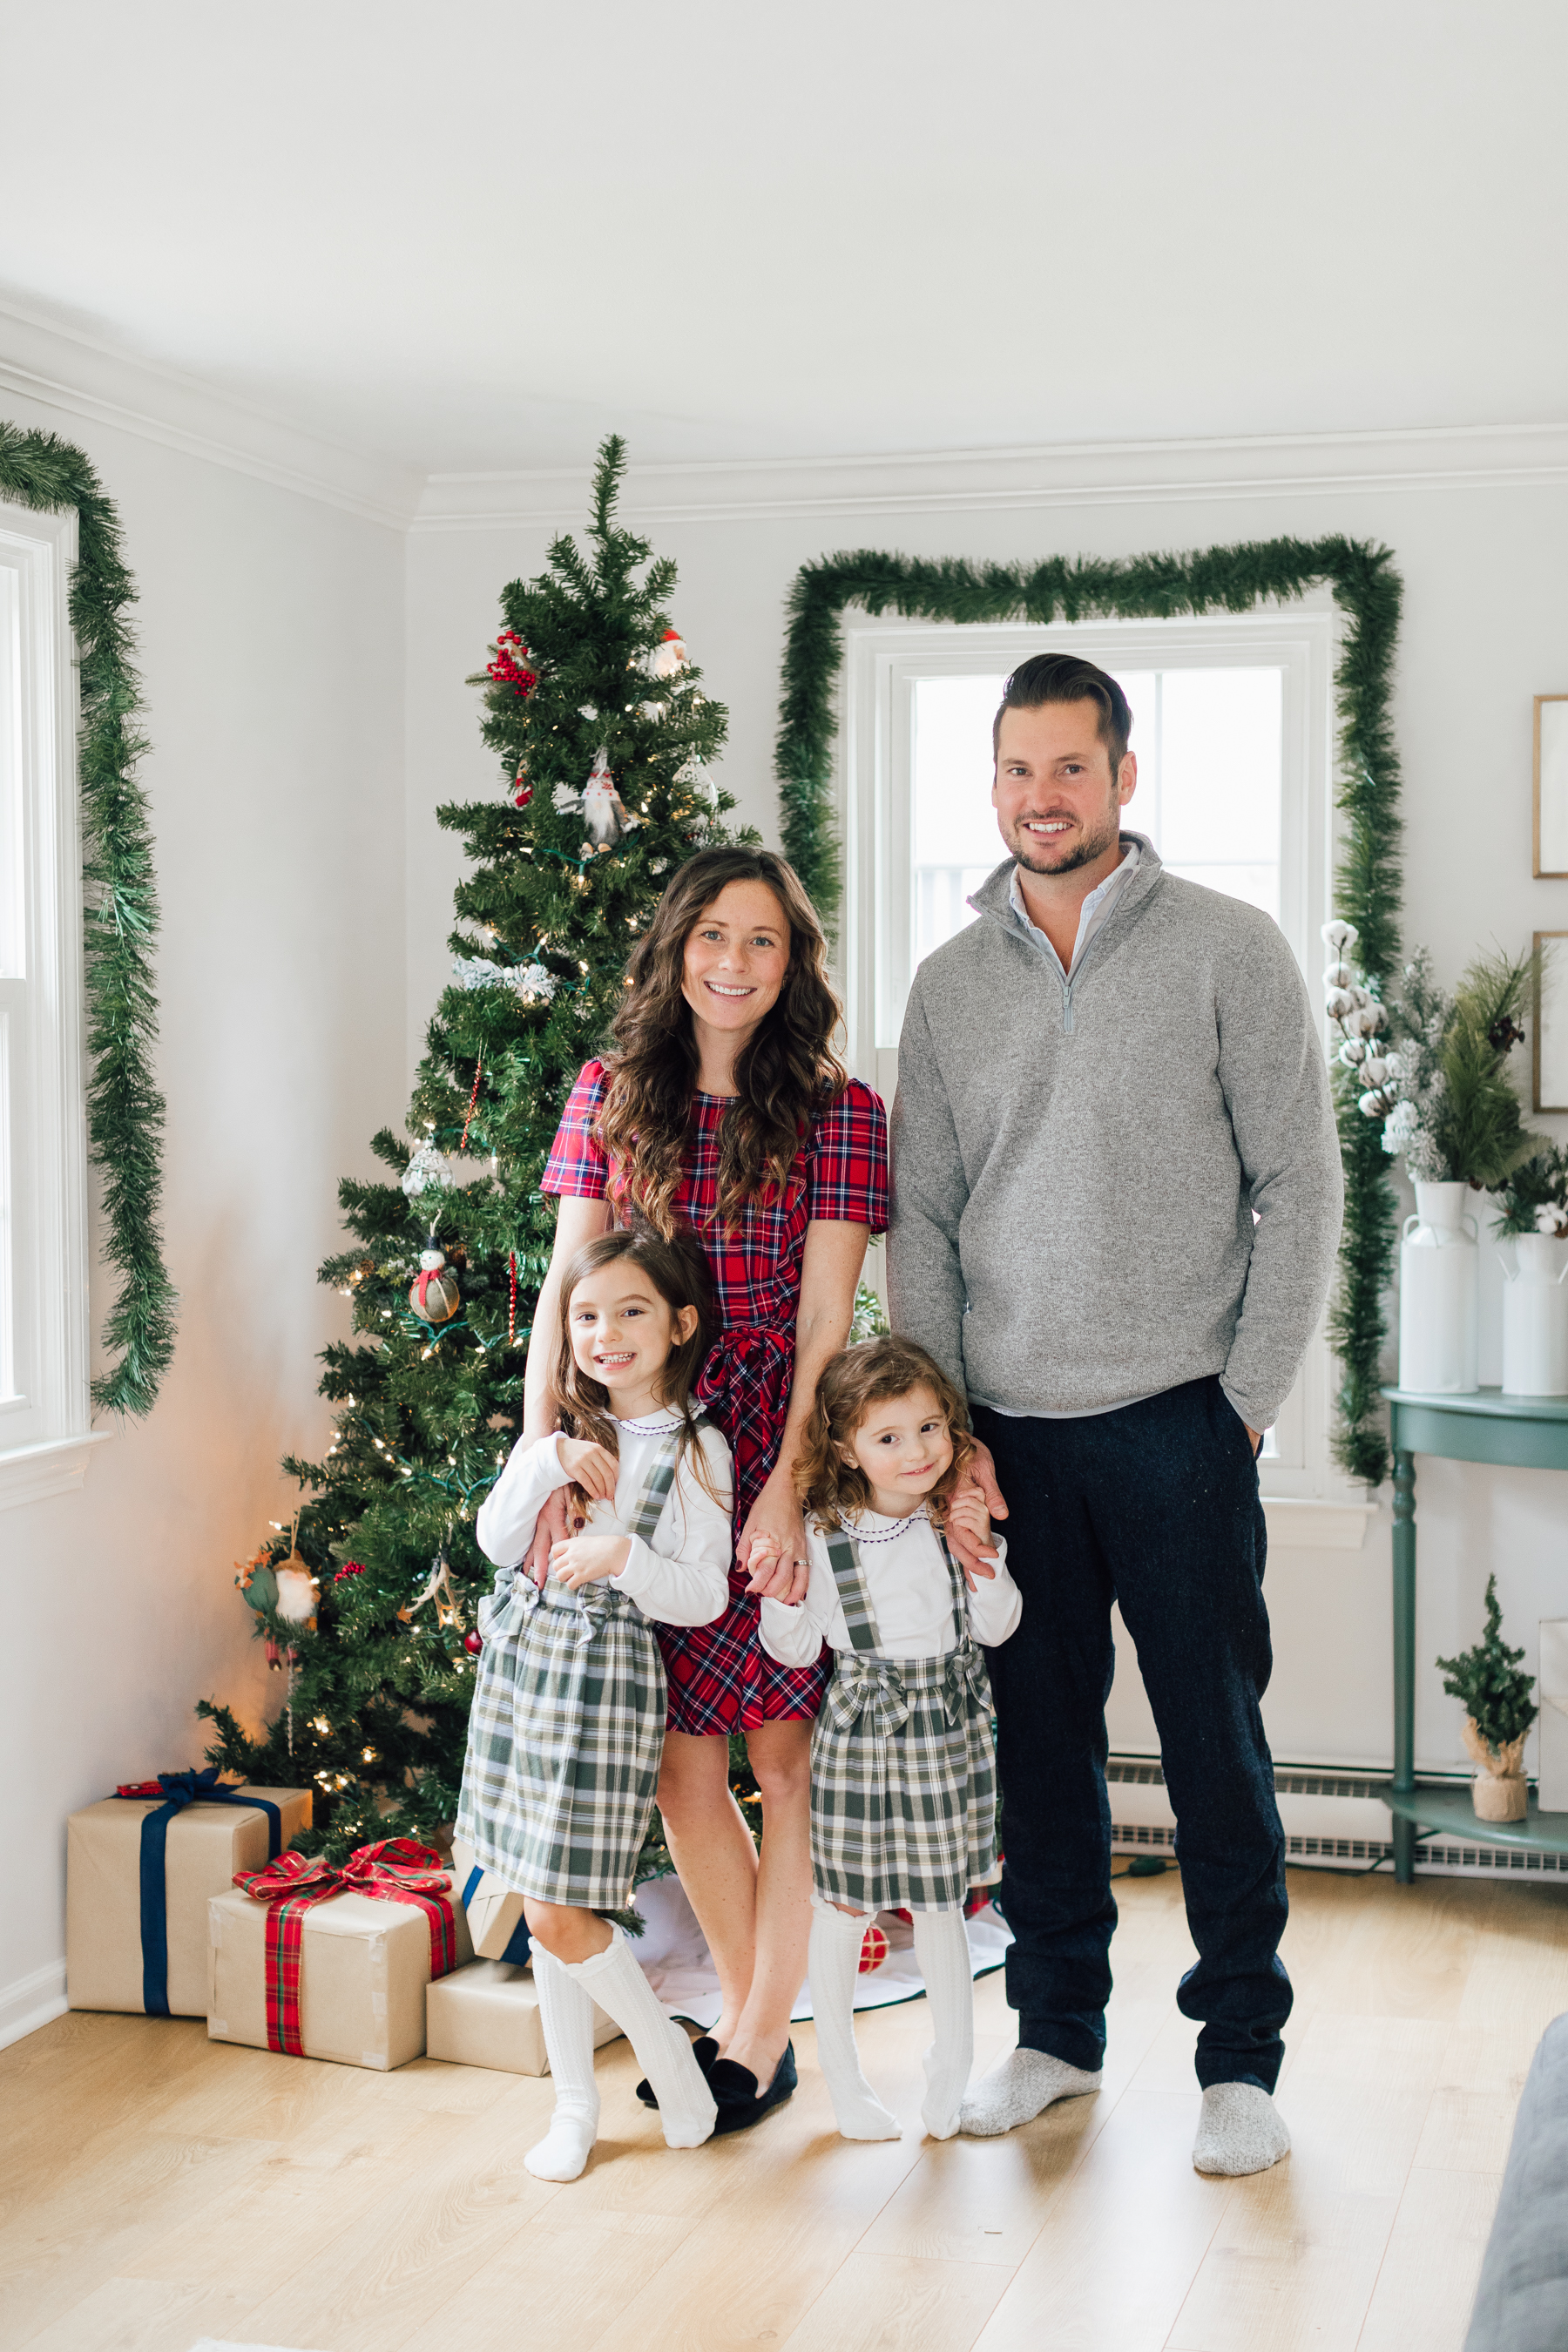 Family Outfits for Holiday Photos - What to wear for your family's Christmas photo session 